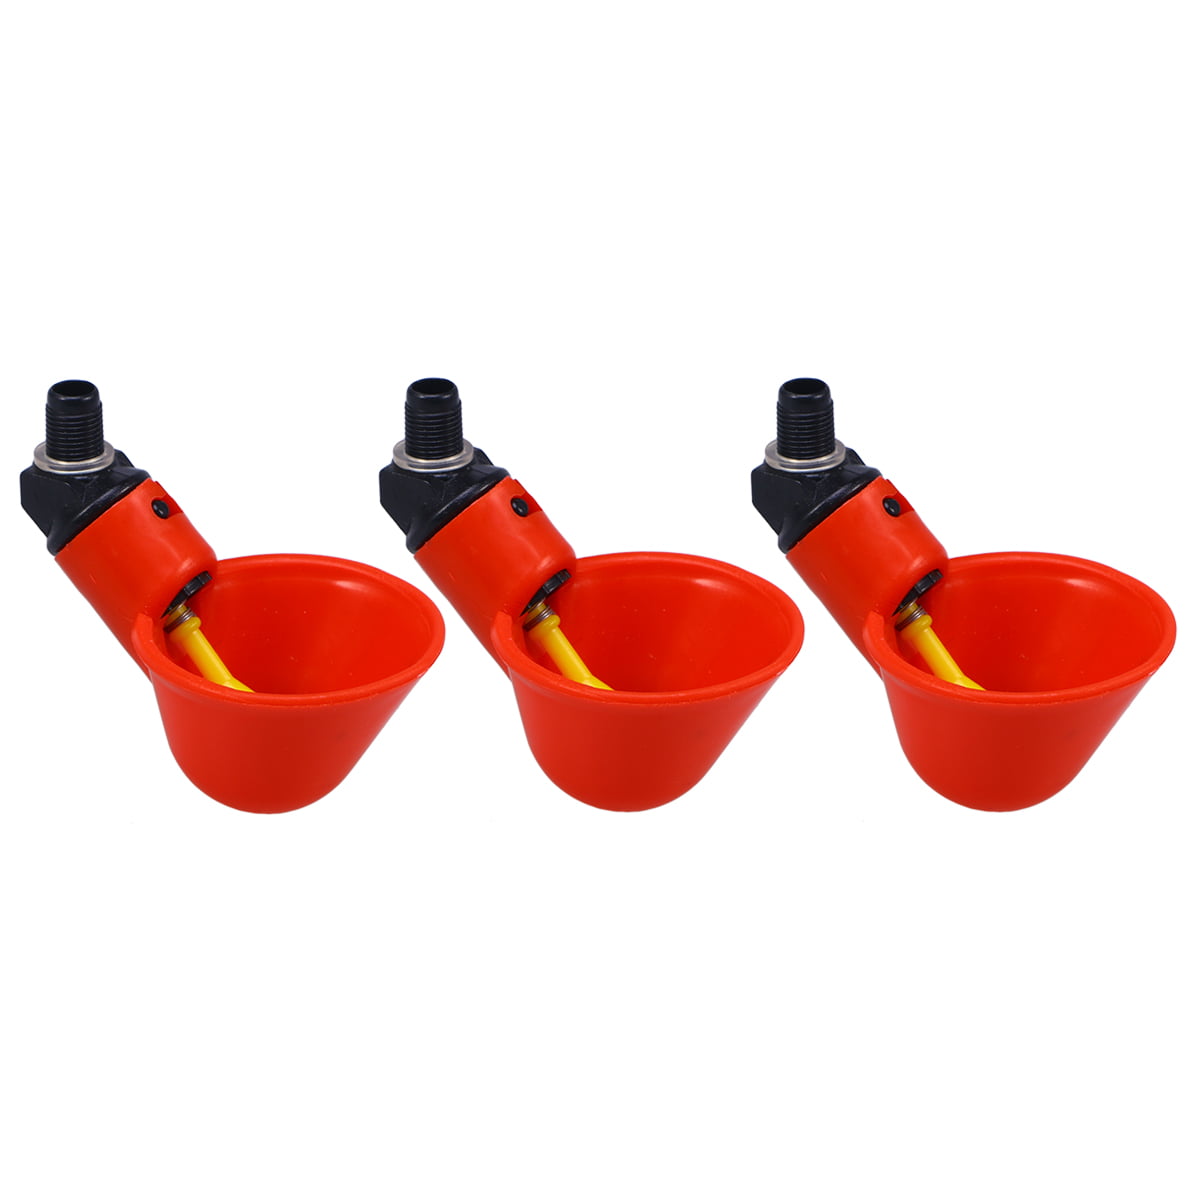 Details about   4pcs Poultry Drinking Cup Feeders Chicken Plastic Automatic Drinking Fountains 